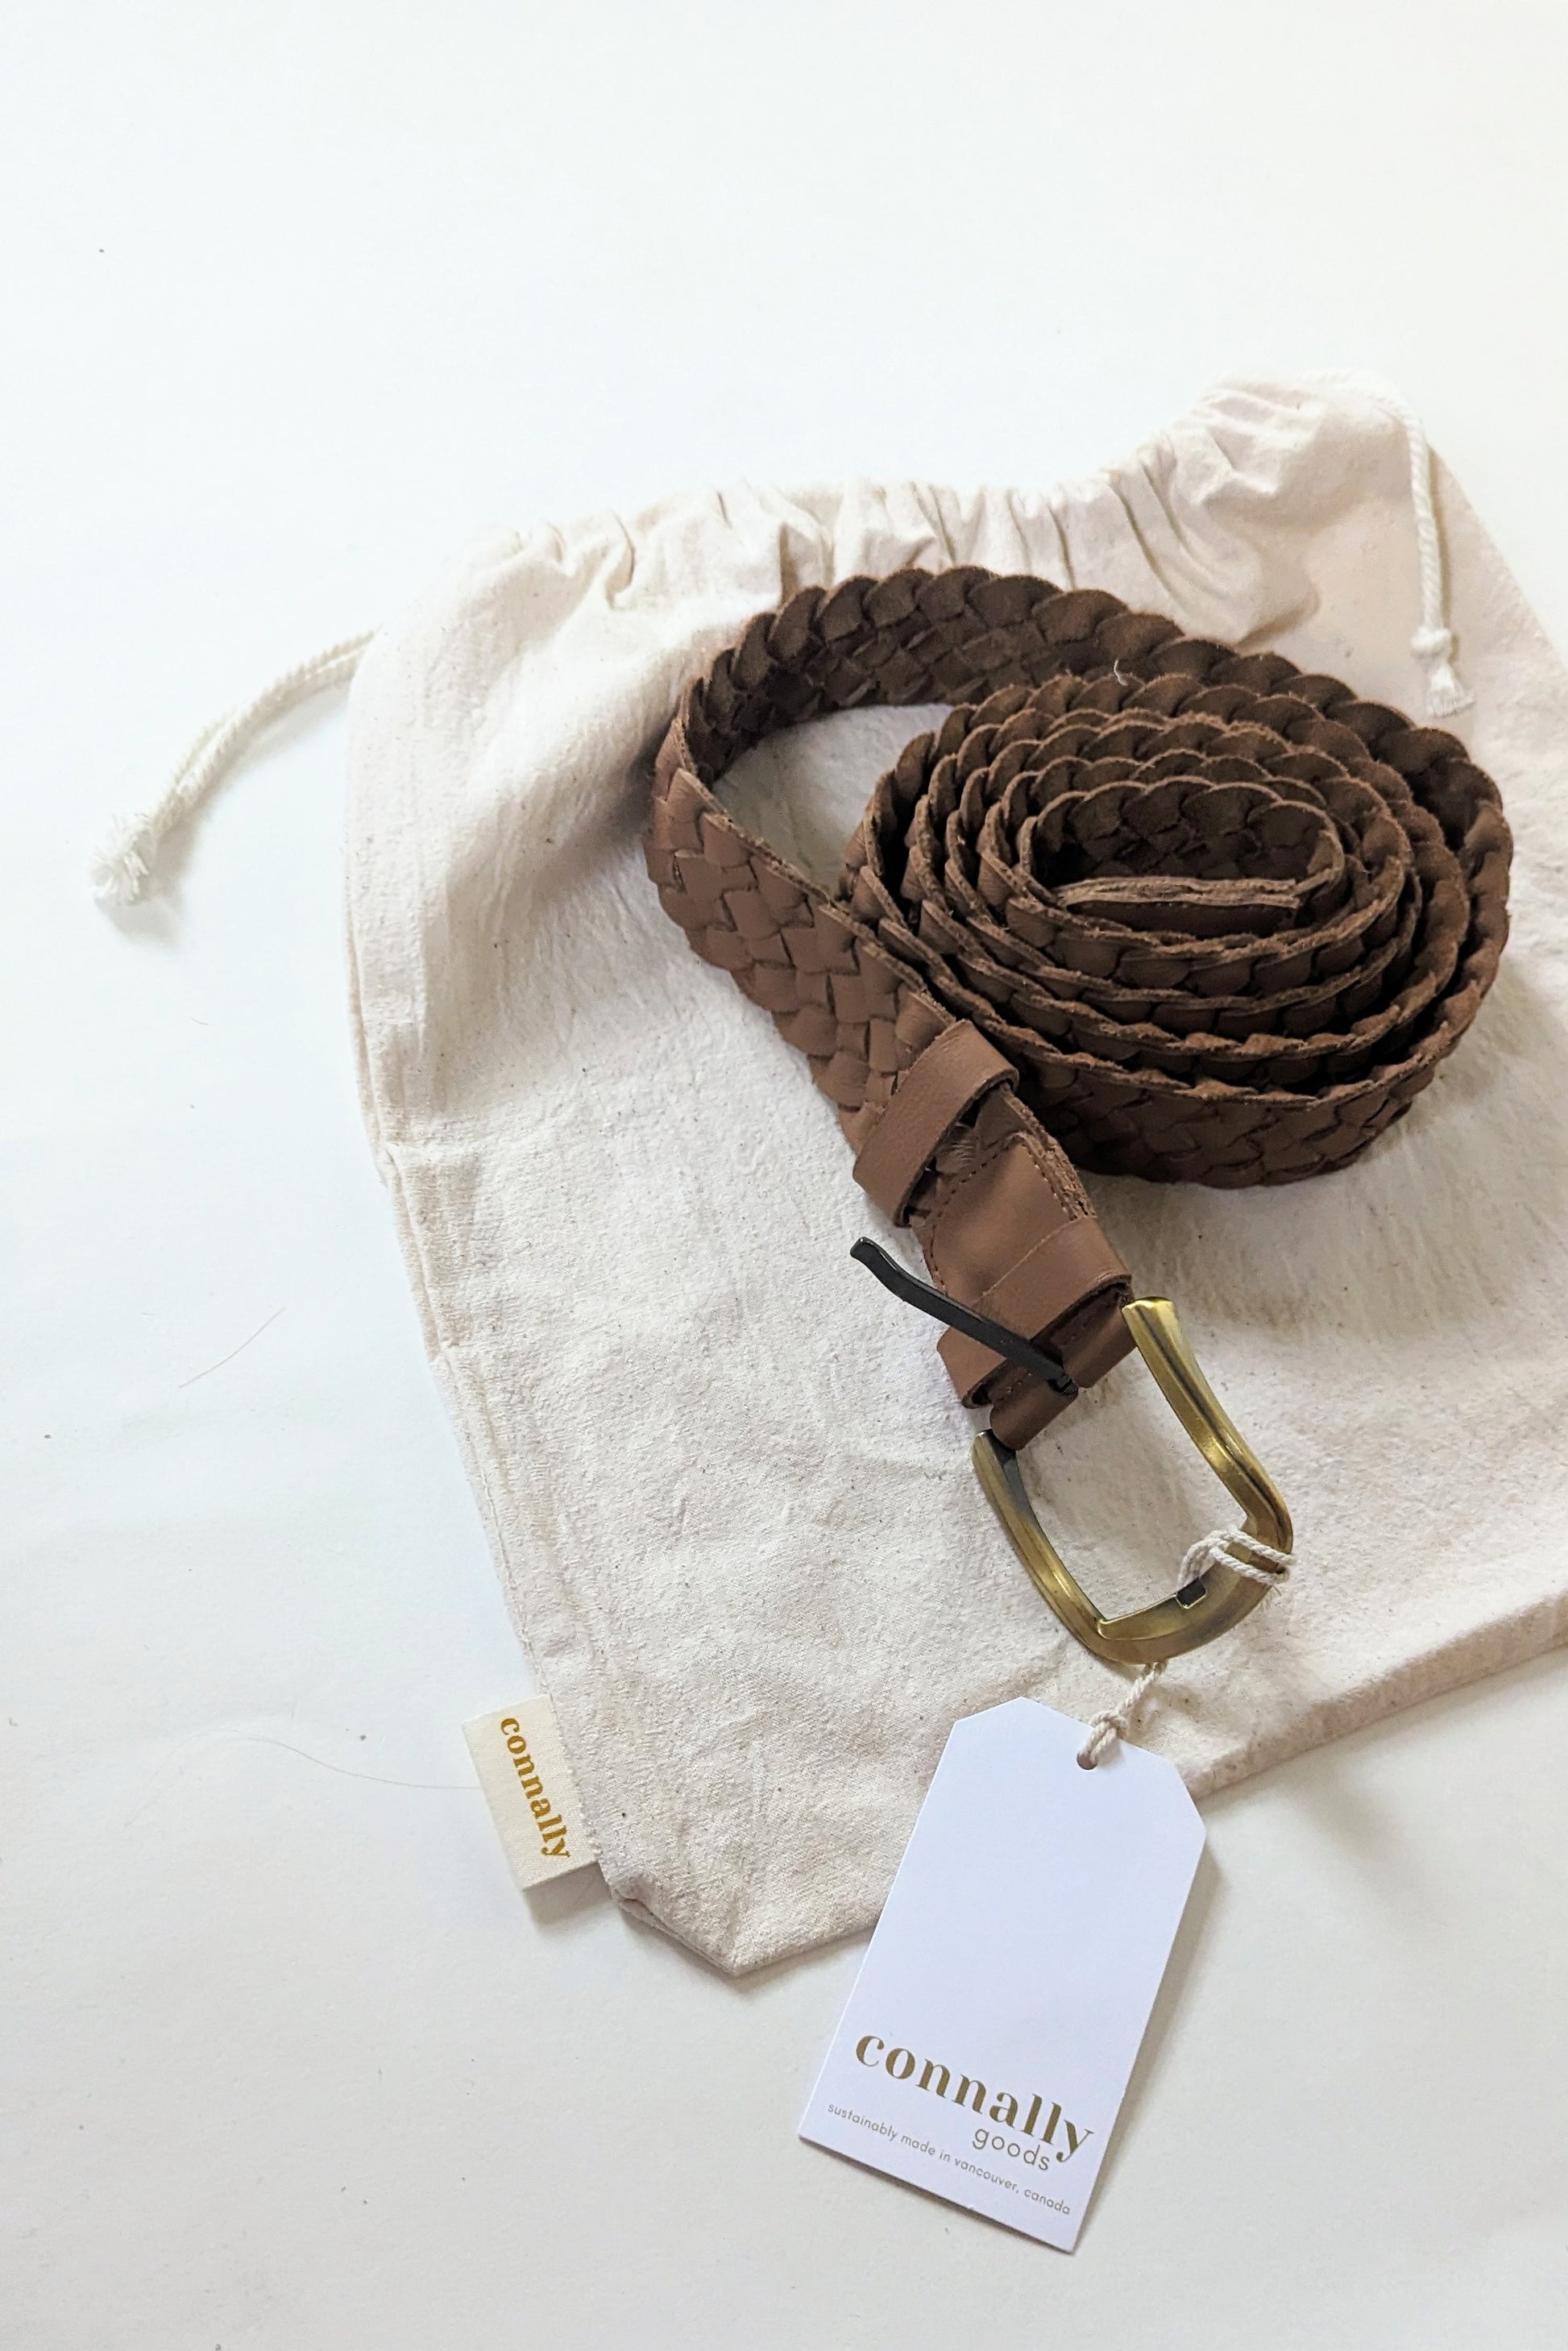 Handwoven Leather Belt by Connally Good